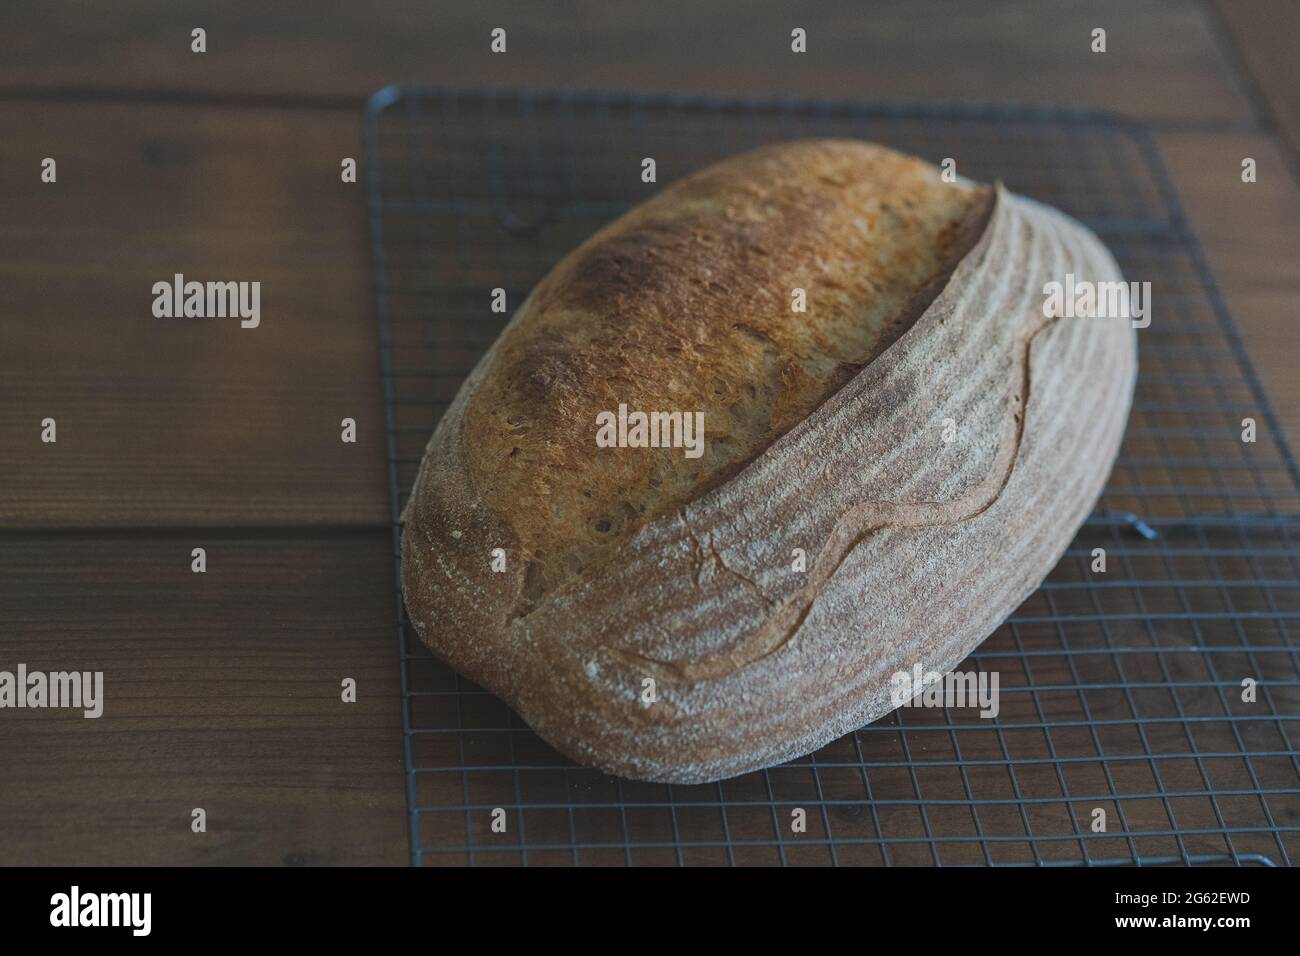 Homemade sourdough bread artisan freshly baked on a cooling rock wood table background Side view Stock Photo